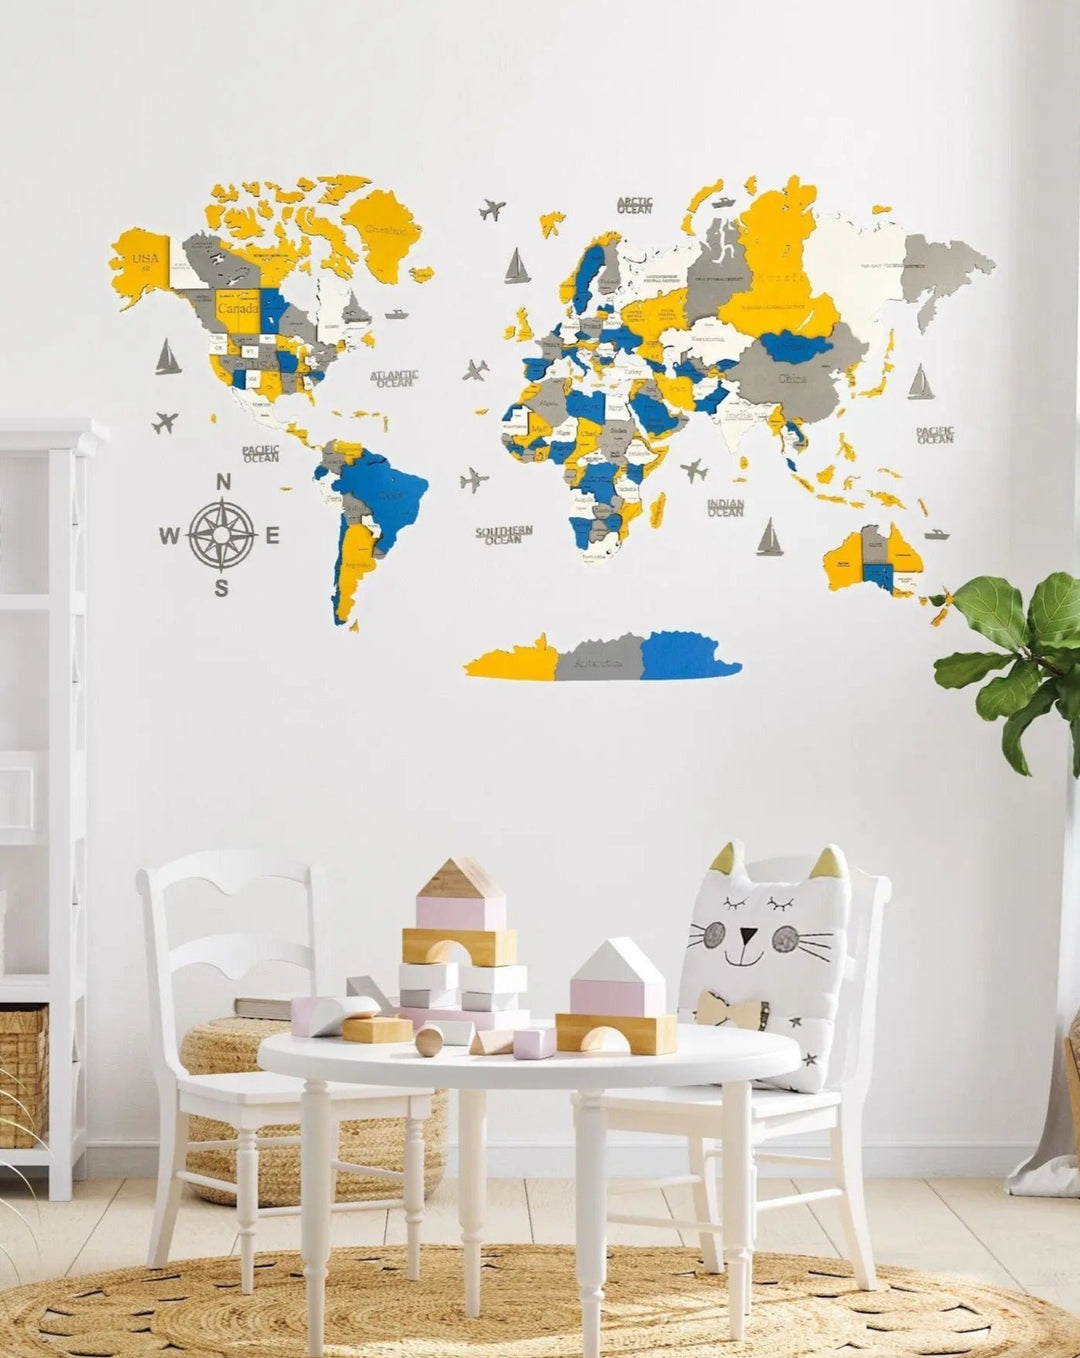 3D WOODEN WALL MAP COLOR “BRAVE” - WoodLeo